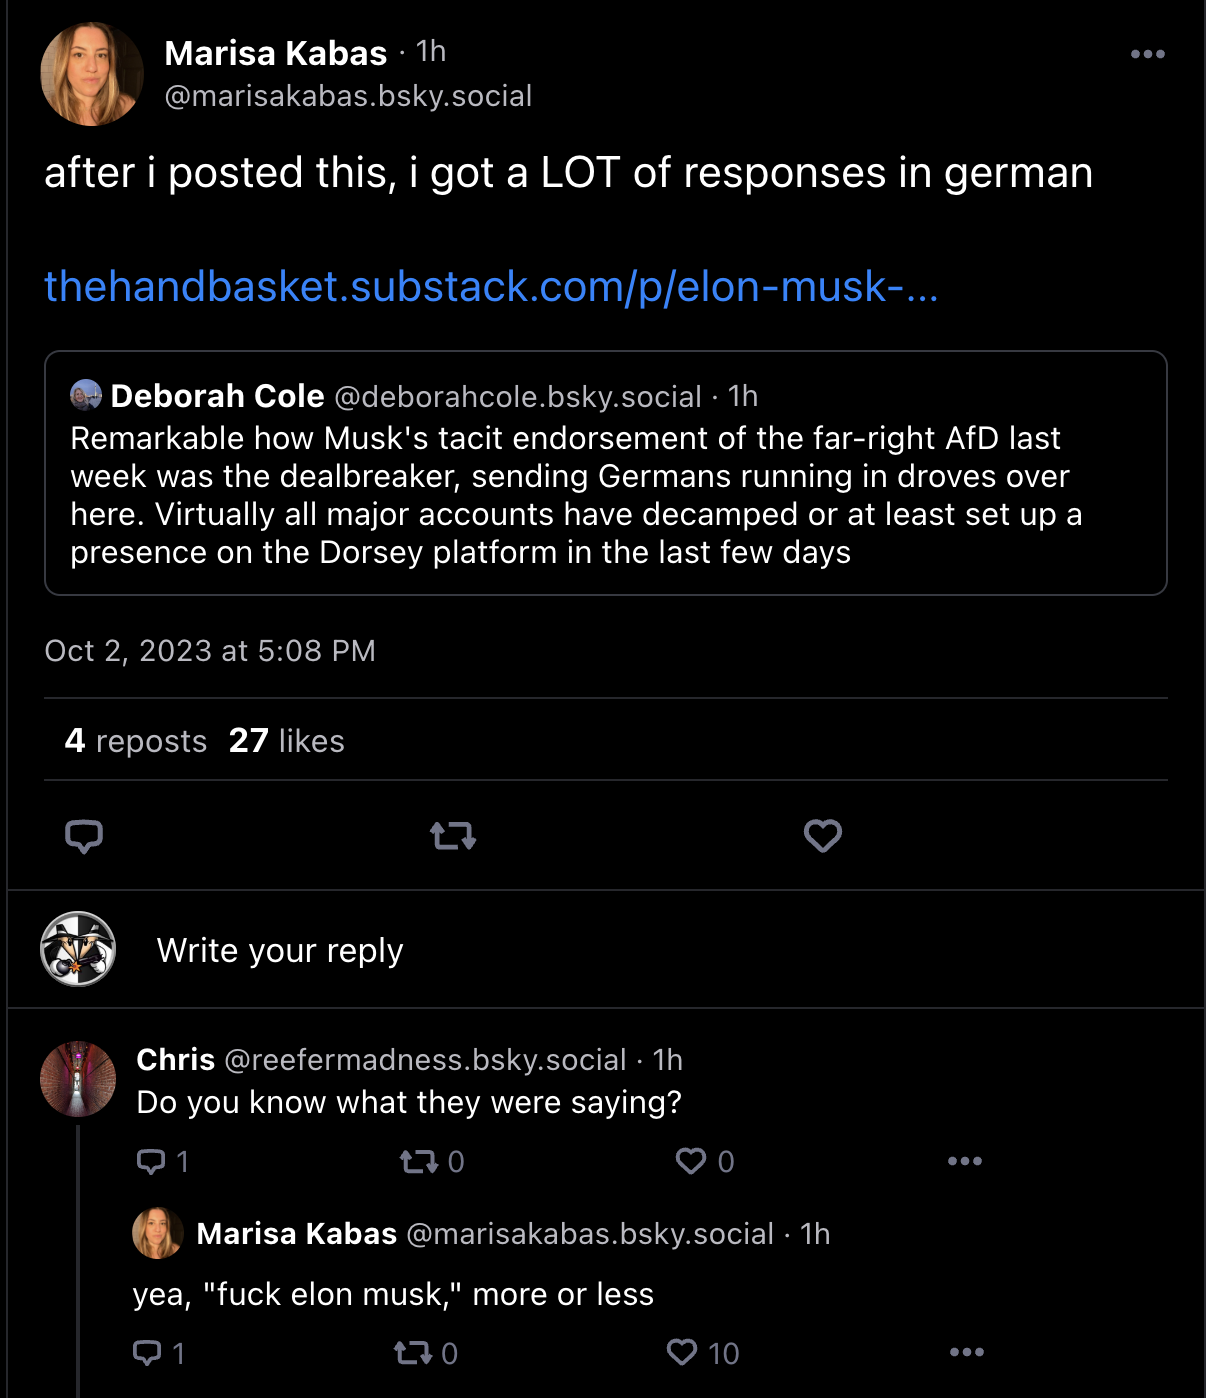 A screengrab of a Bluesky post by Marisa Kabas stating she got a lot of replies in German to her reportin on Musk embracing the AfD.